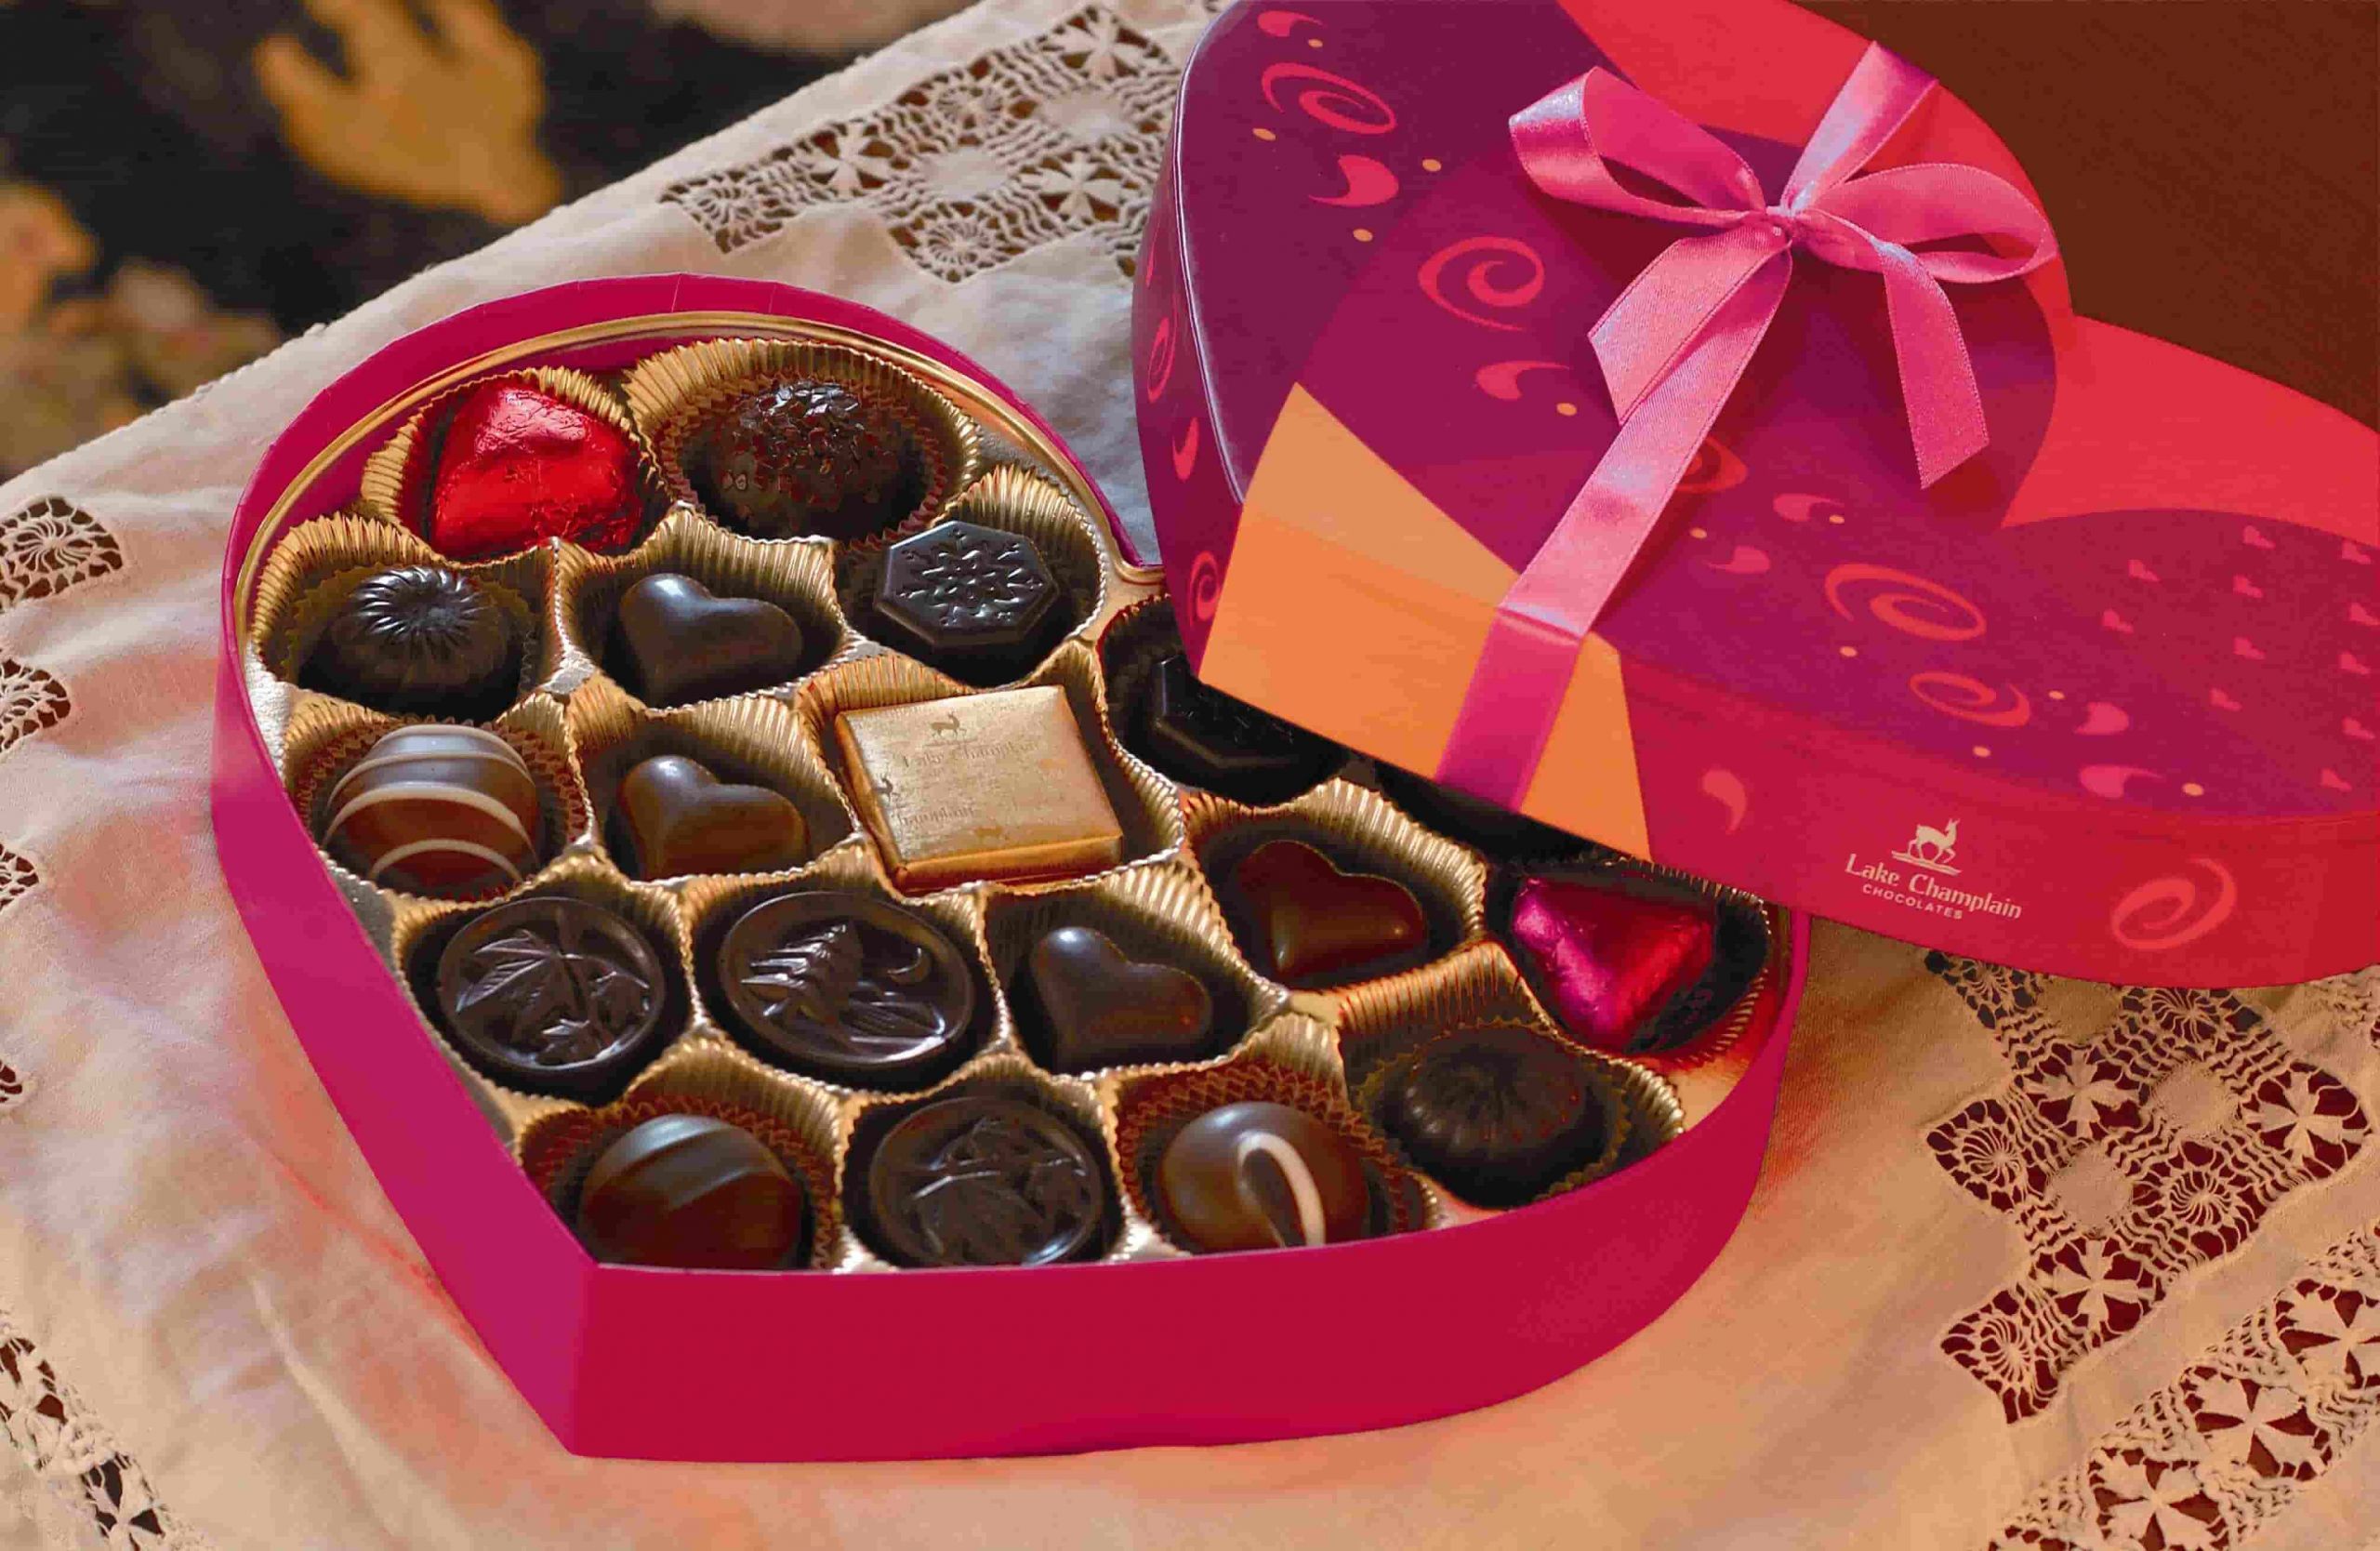 Valentines Day Candy Gift Ideas
 Mesmerizing Valentine s Day Chocolate & Chocolate Gift